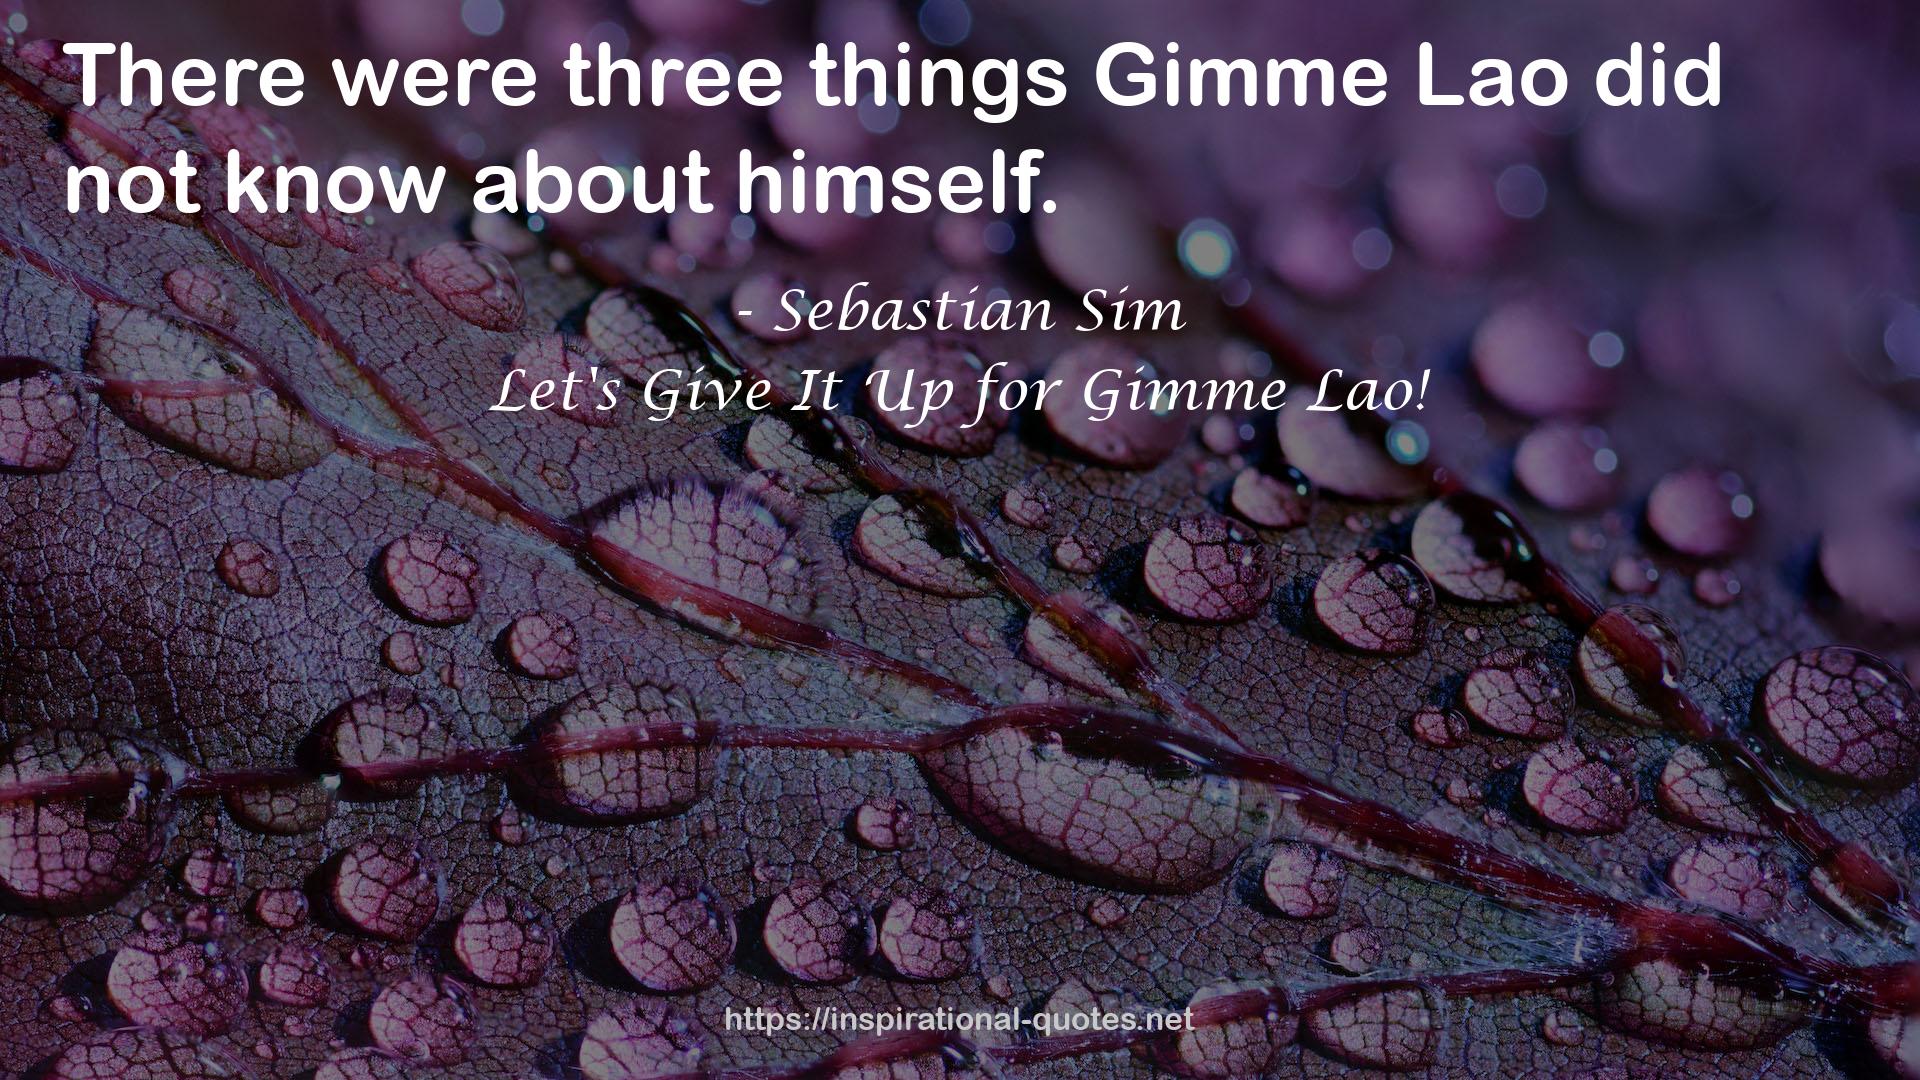 Let's Give It Up for Gimme Lao! QUOTES